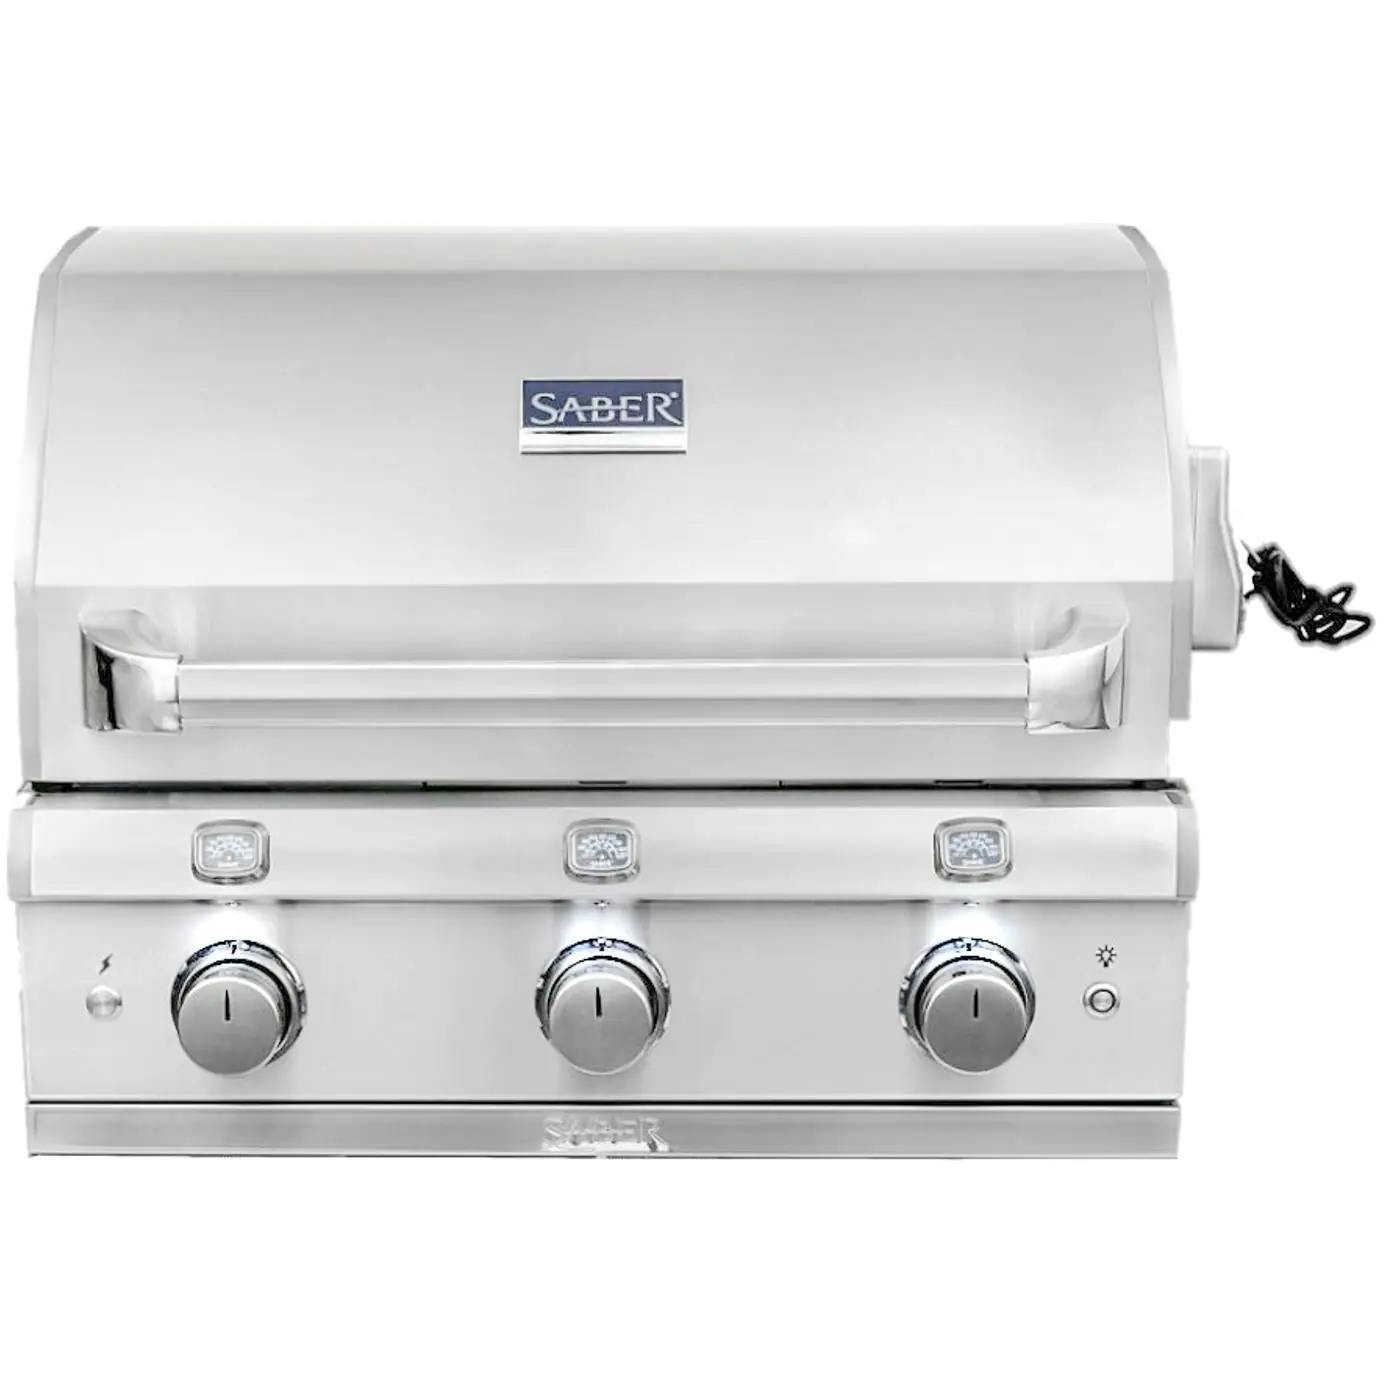 Saber Elite 1500 Built-in Gas Grill · 32 in. · Natural Gas